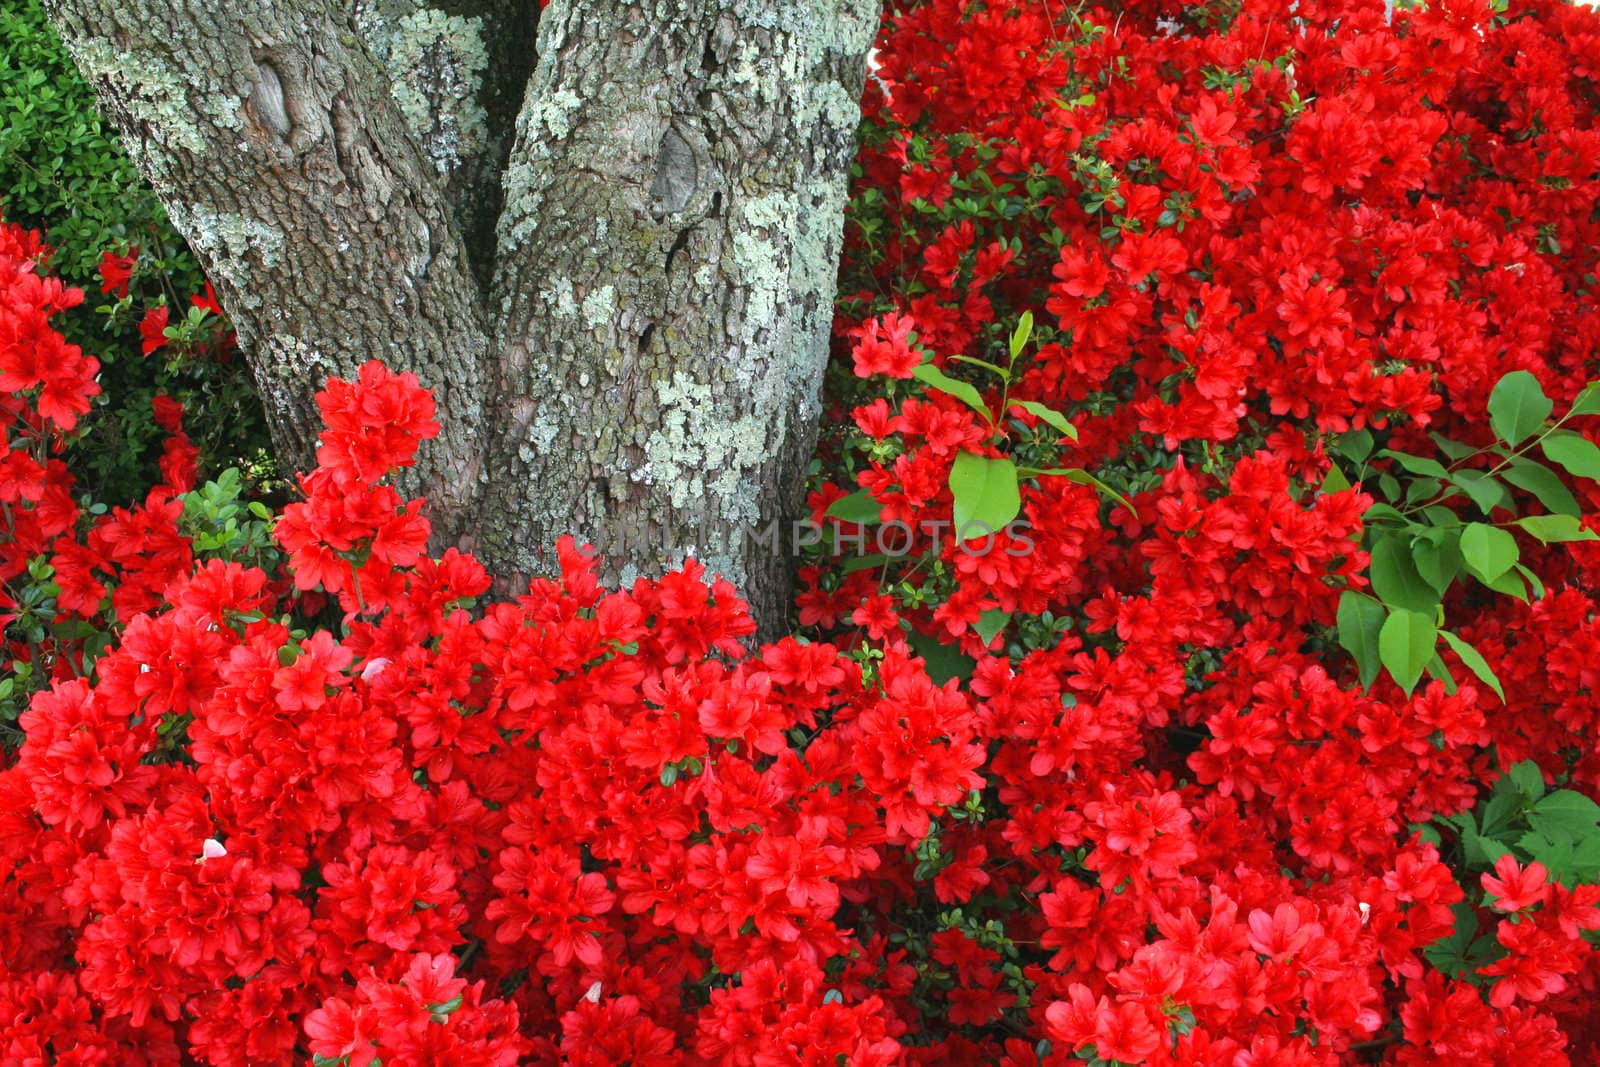 A beautiful azalea full or red blooms and a tree trunk that adds texture.  A great nature background.